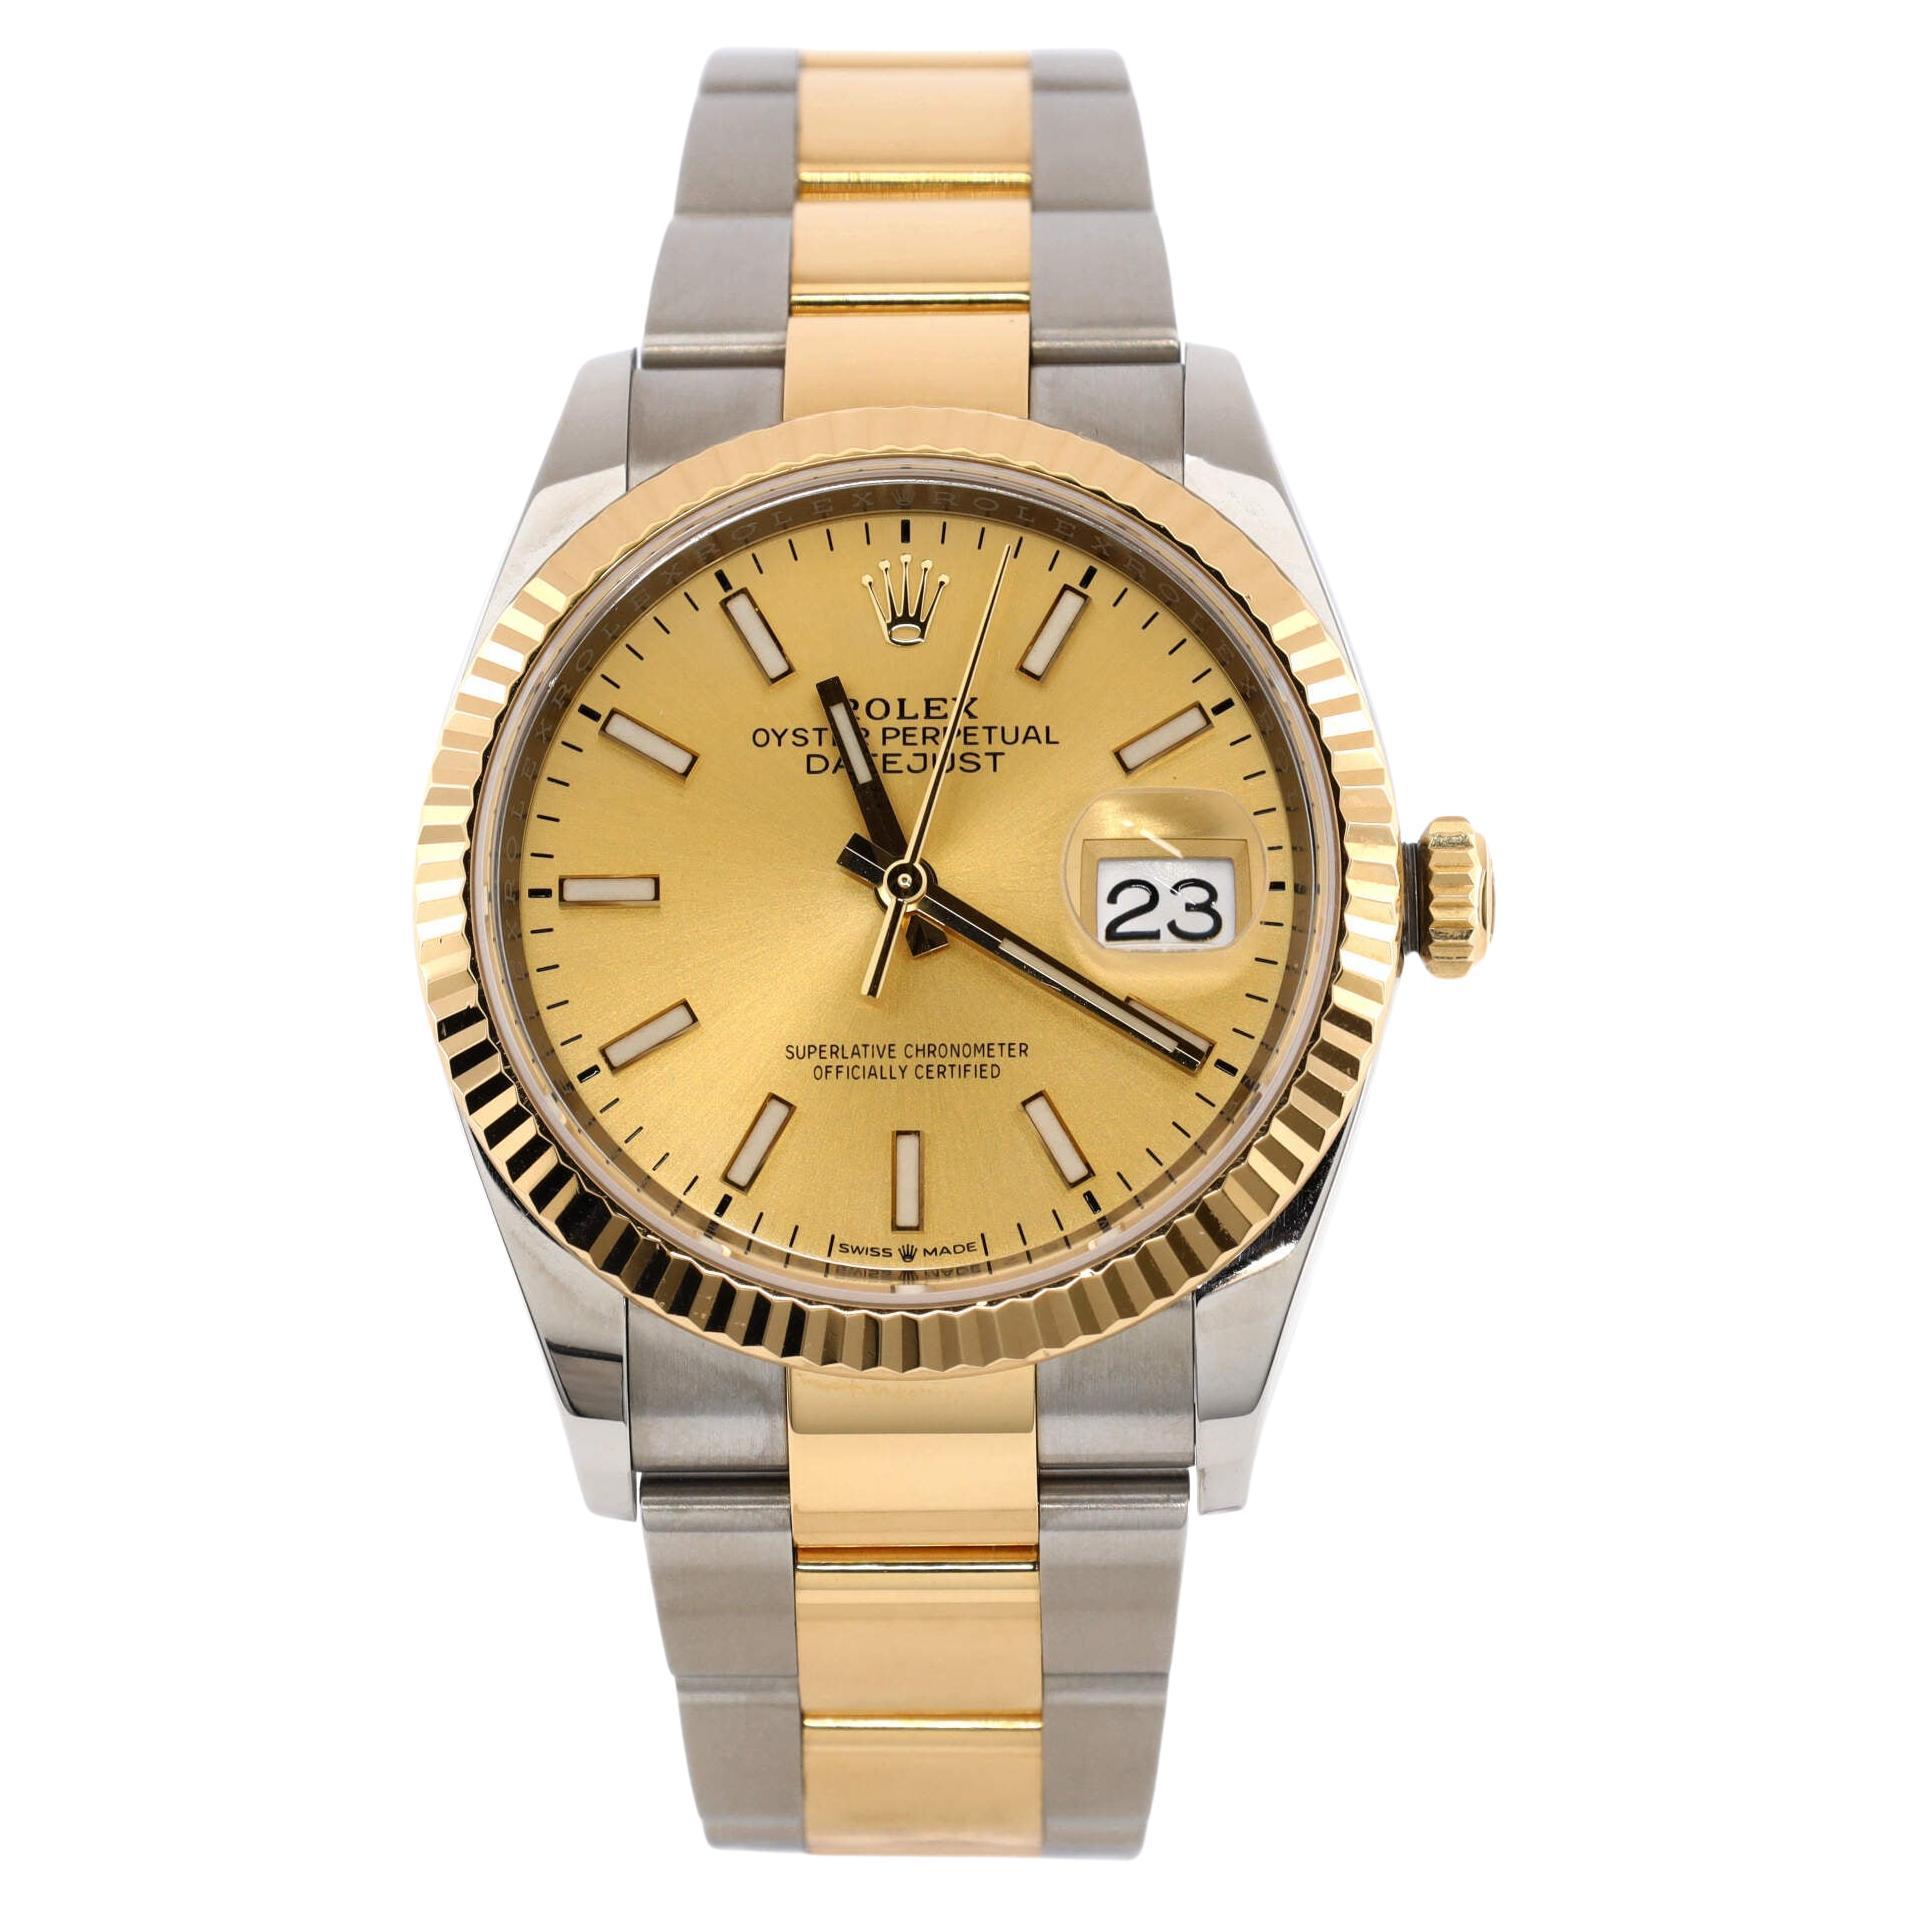 Rolex Oyster Perpetual Datejust Automatic Watch Stainless Steel and Yellow Gold For Sale